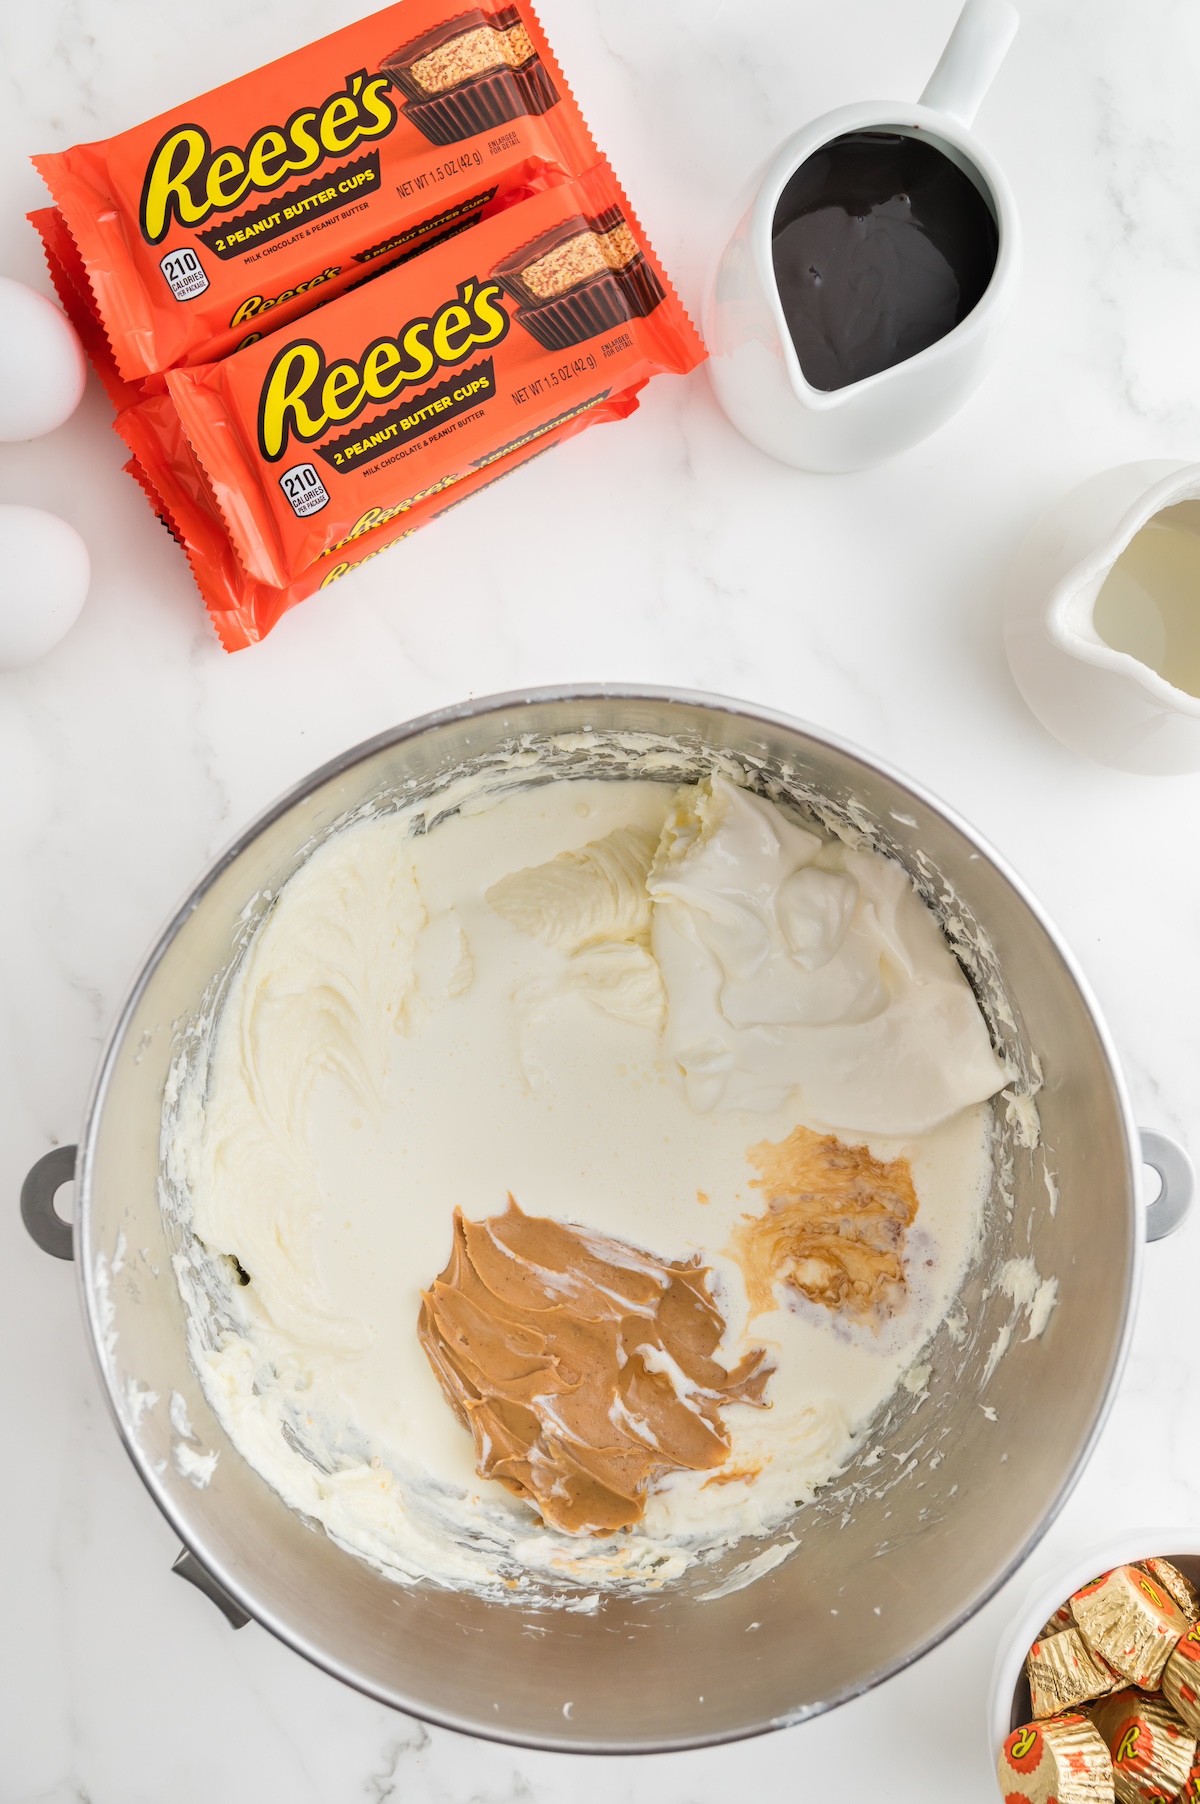 Heavy cream, peanut butter, sour cream, and vanilla added to the mixture